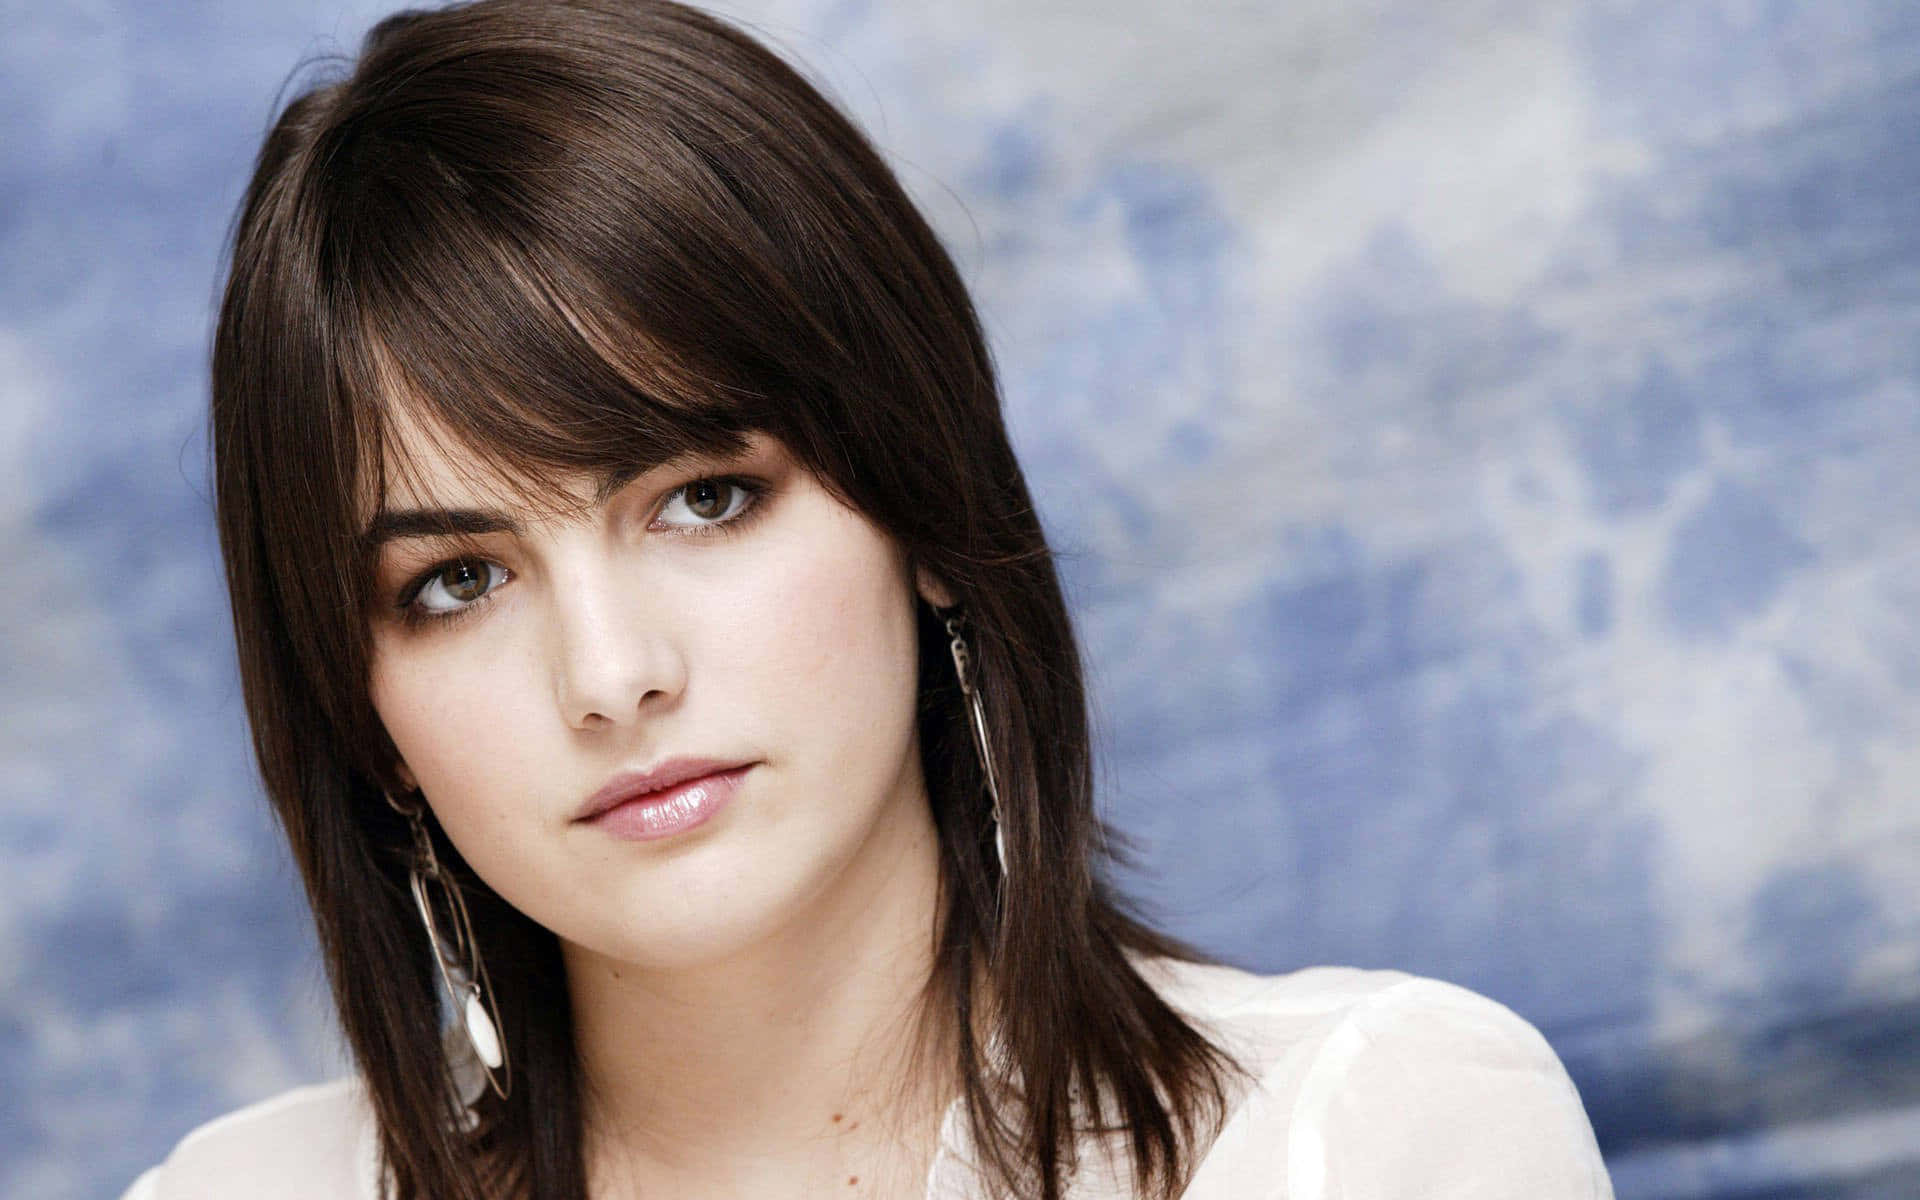 Stunning Camilla Belle in a glamorous photoshoot Wallpaper